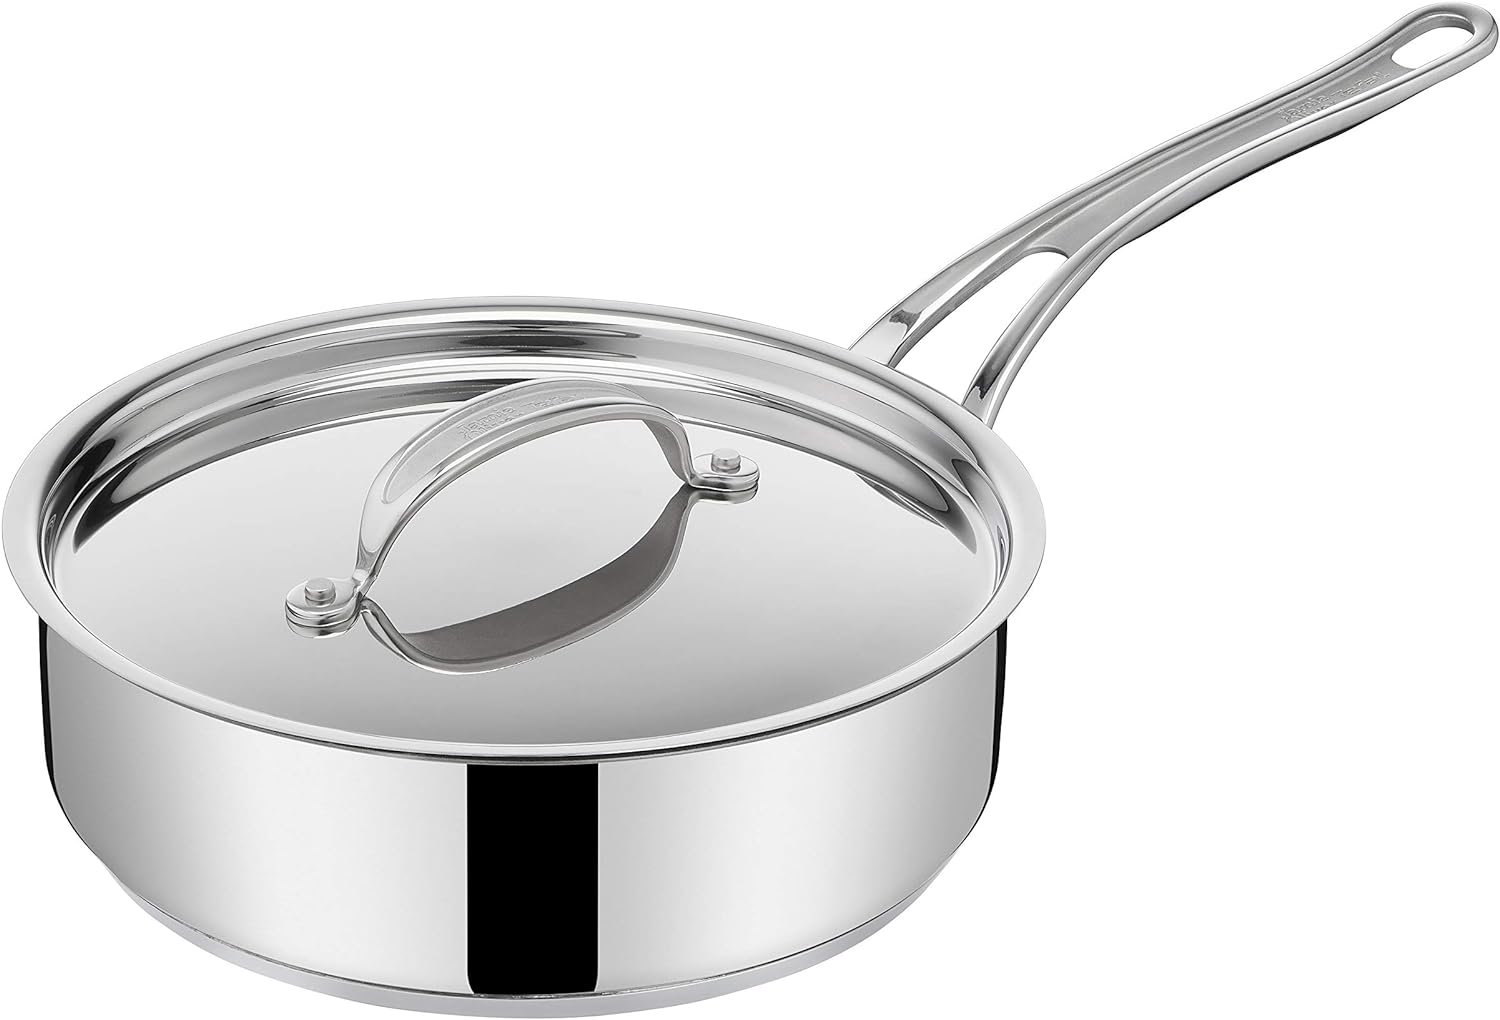 Tefal Jamie Oliver Cook's Classics Stainless Steel 24cm Saute Pan